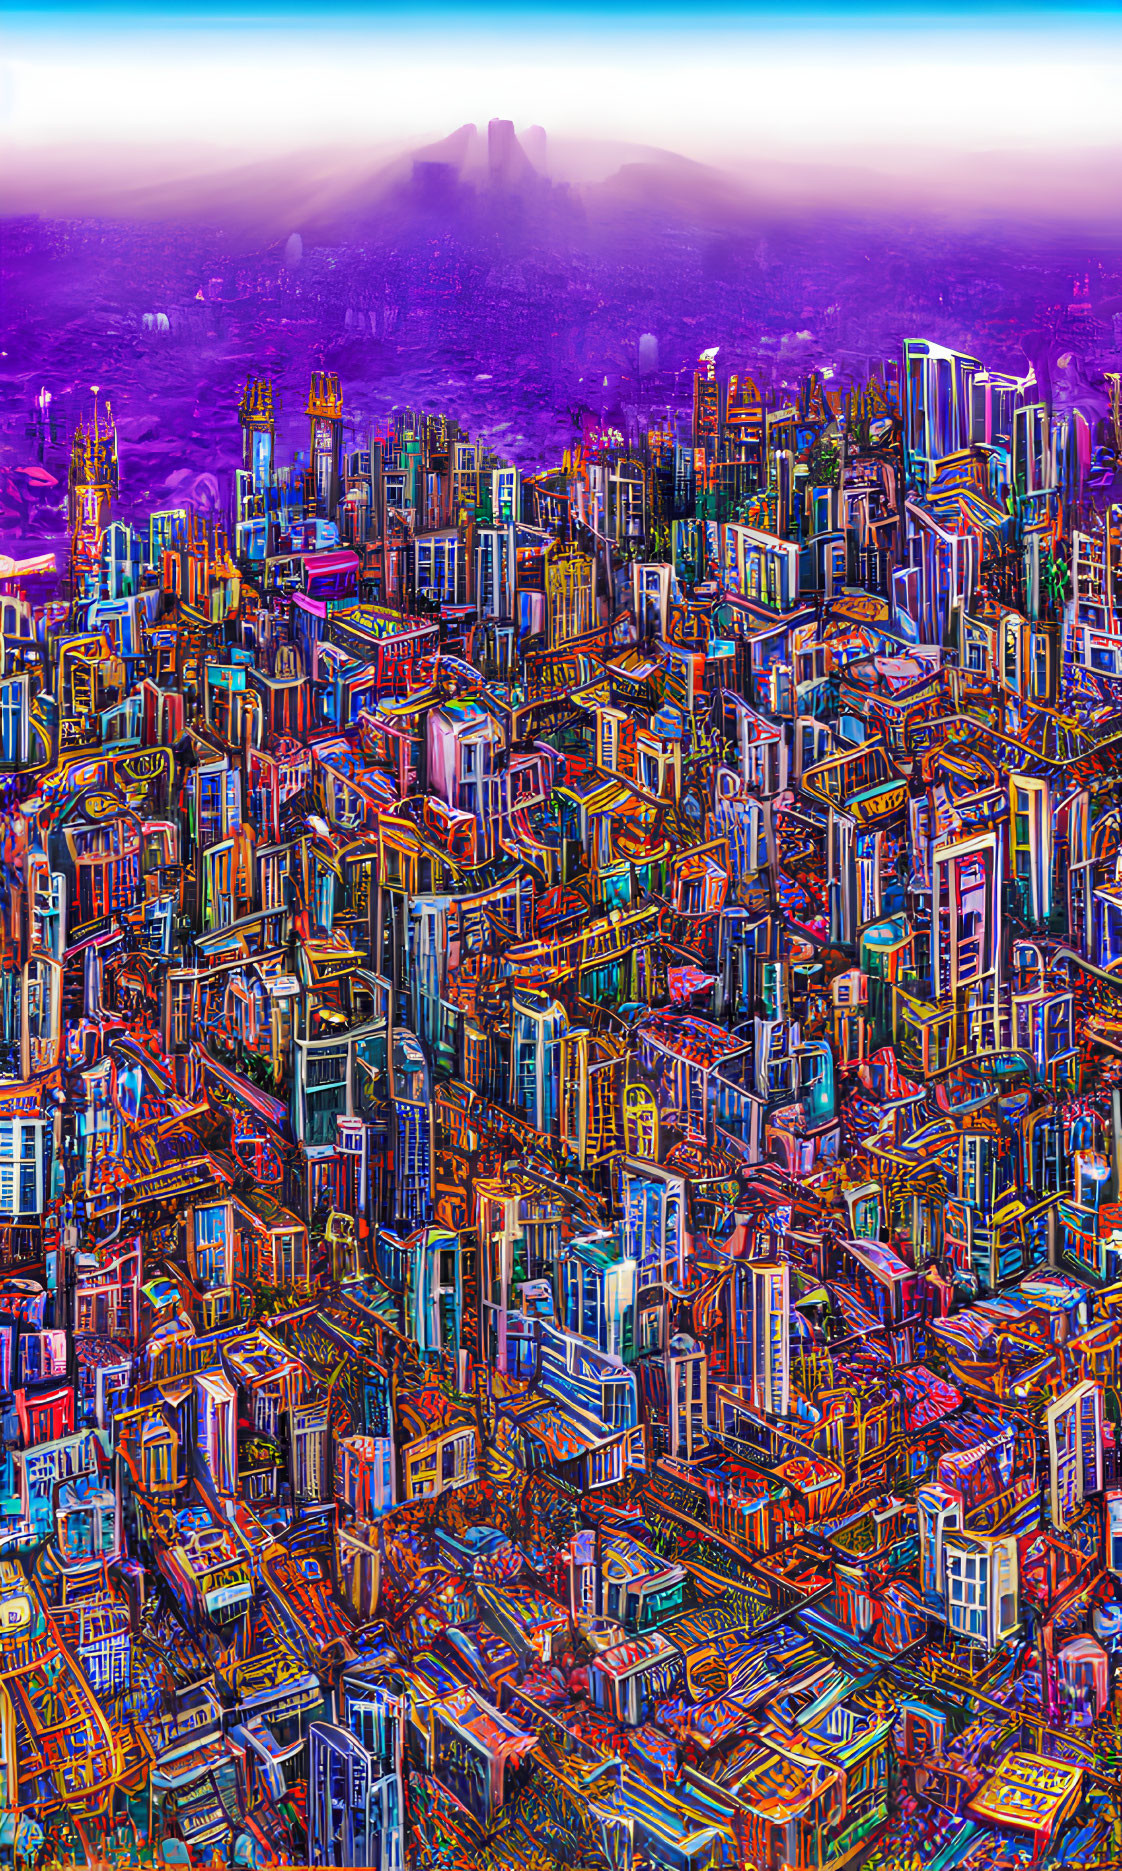 Colorful Psychedelic Cityscape at Twilight